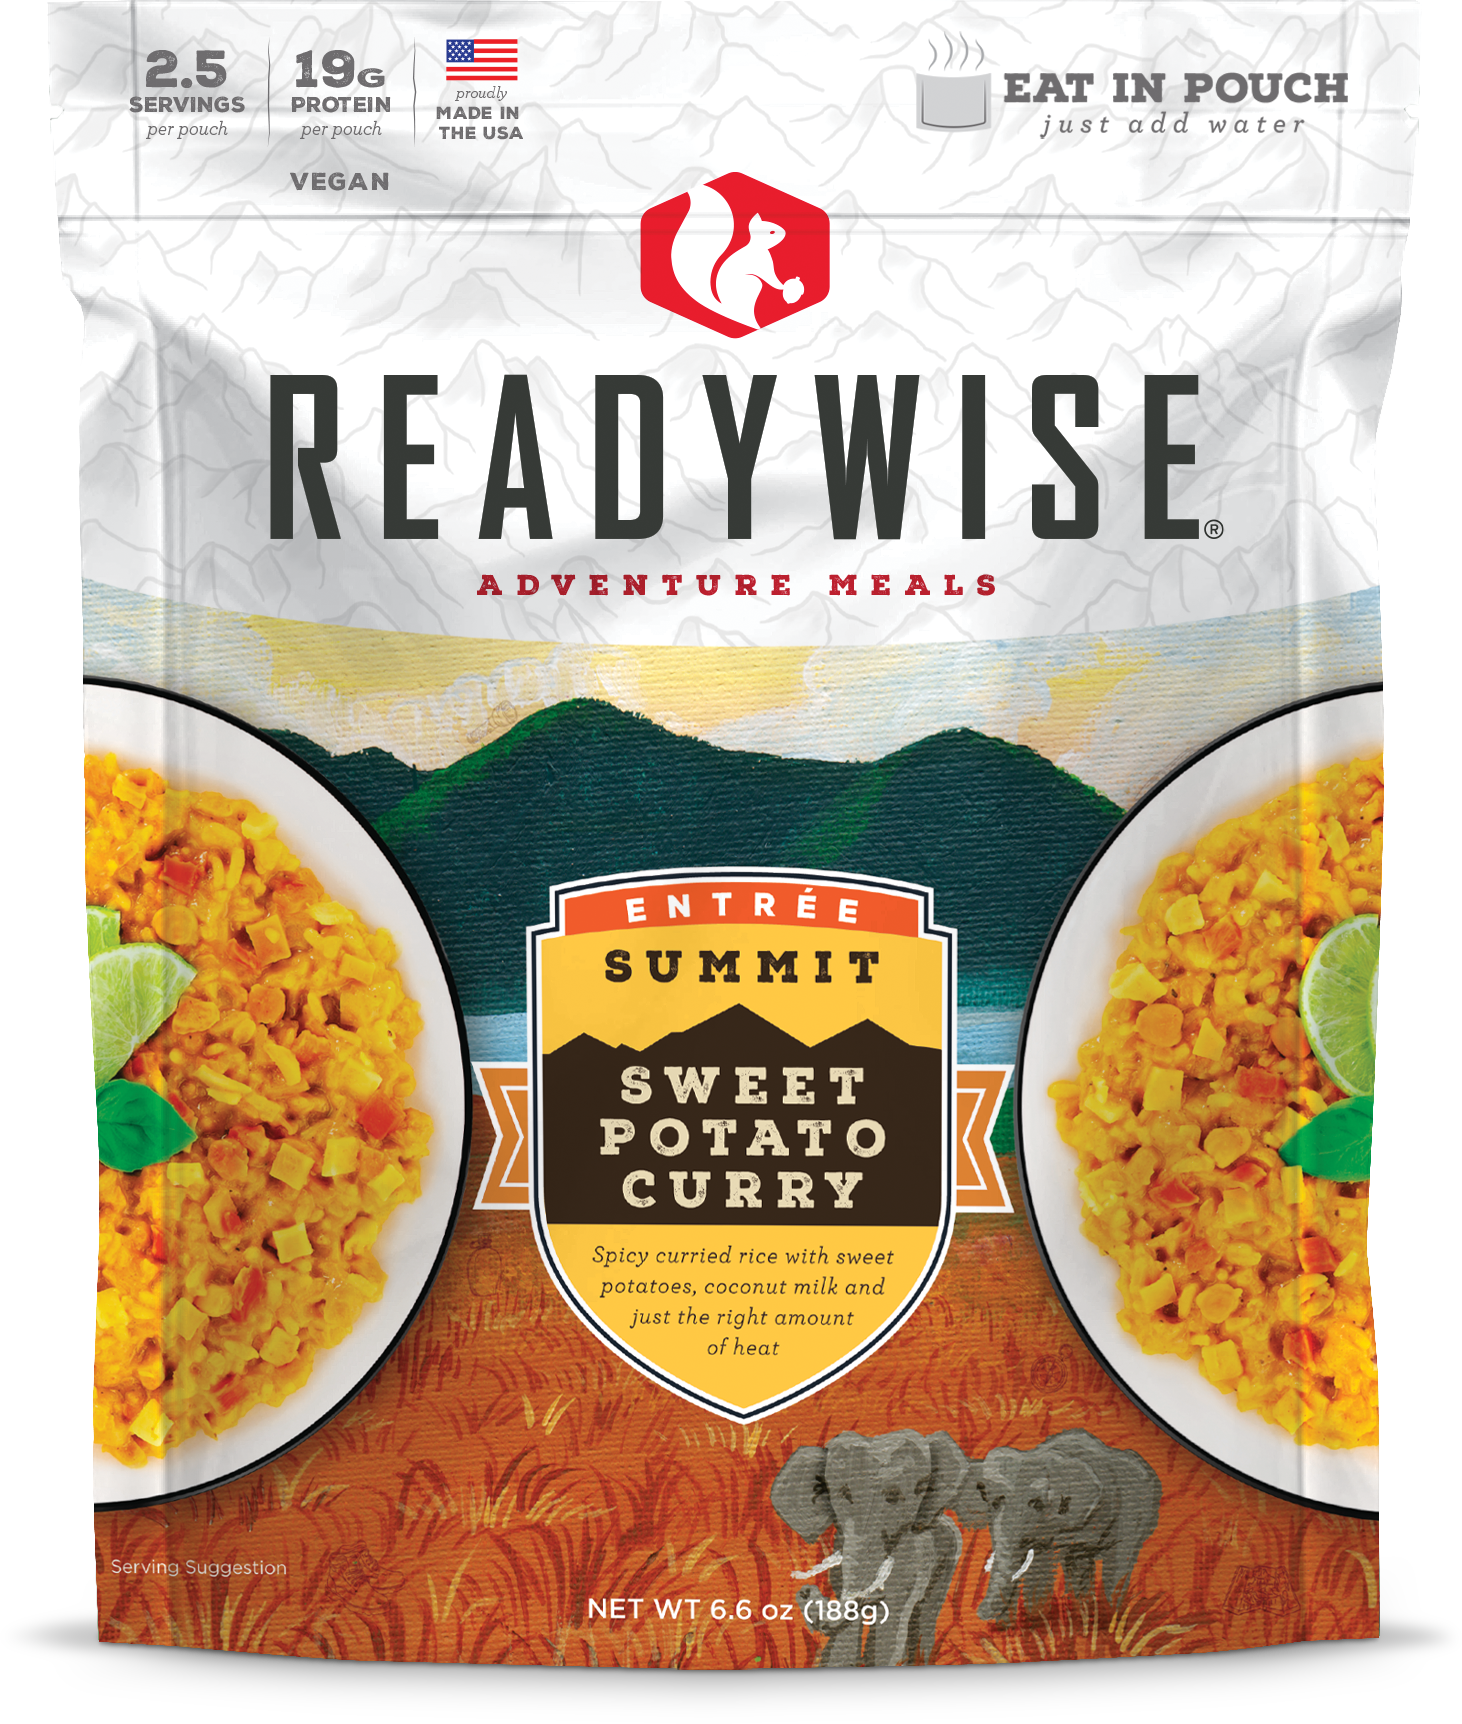 Readywise (formerly Wise Food Storage) Summit Sweet Potato Curry pouches.